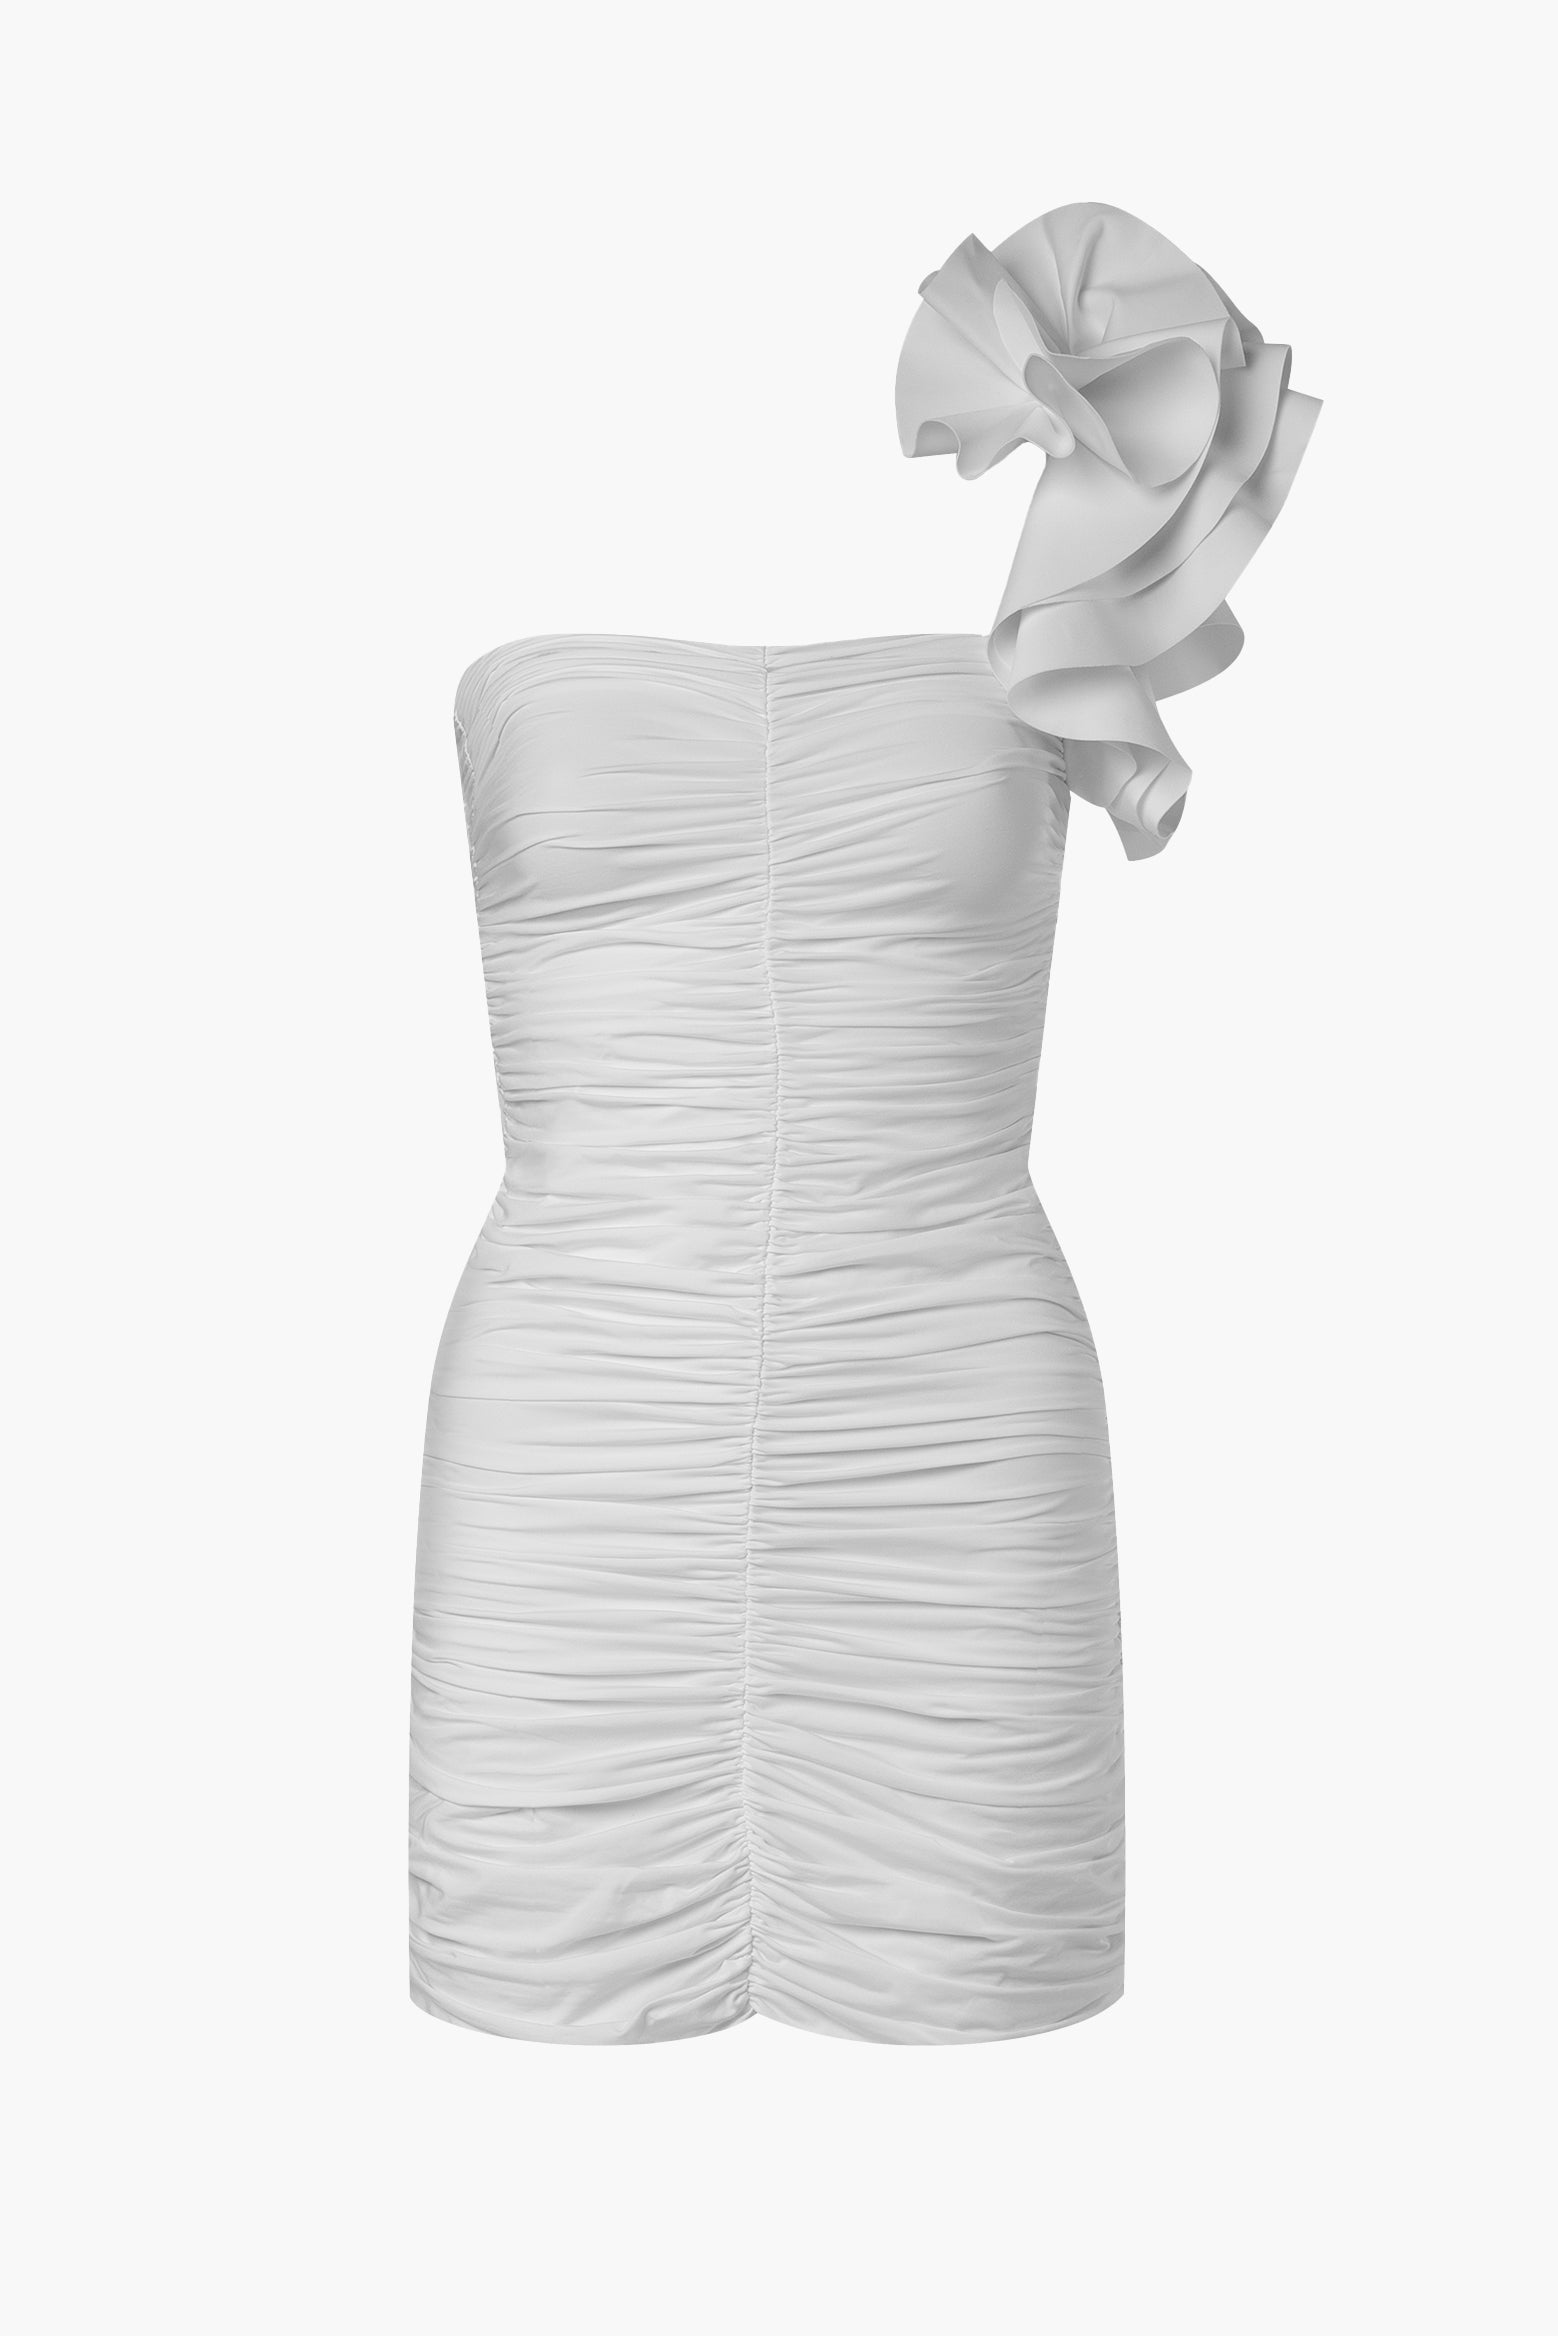 Maygel Coronel Equinoccio Dress in Off White available at The New Trend Australia.